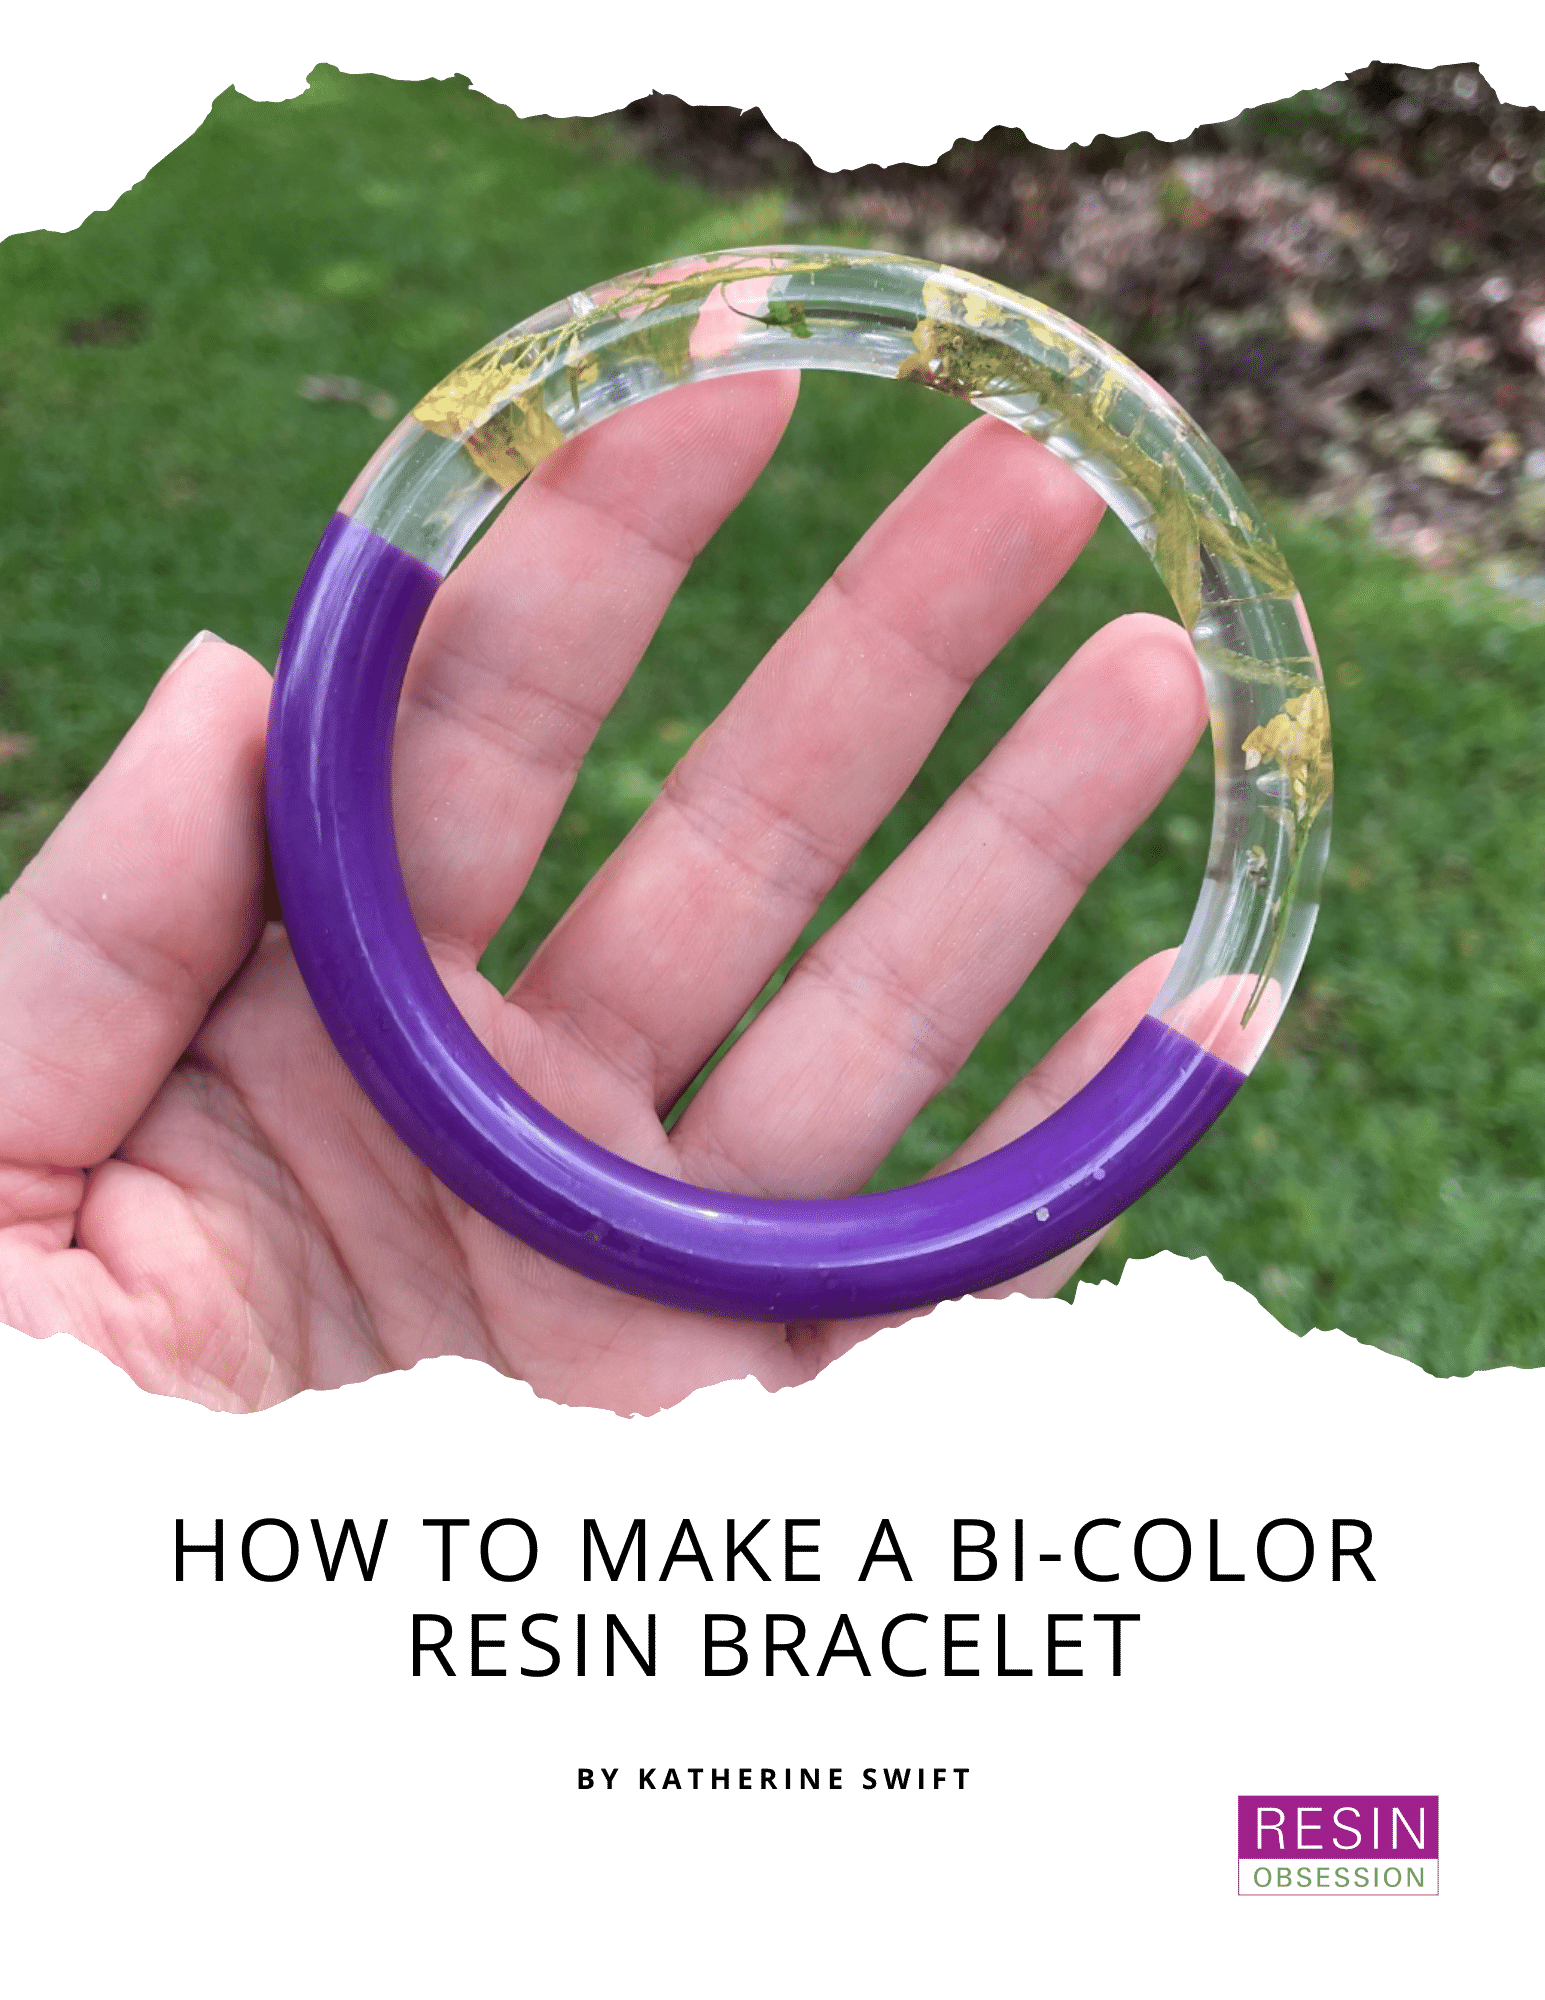 How to Sand and Finish a Resin Bangle Bracelet - YouTube